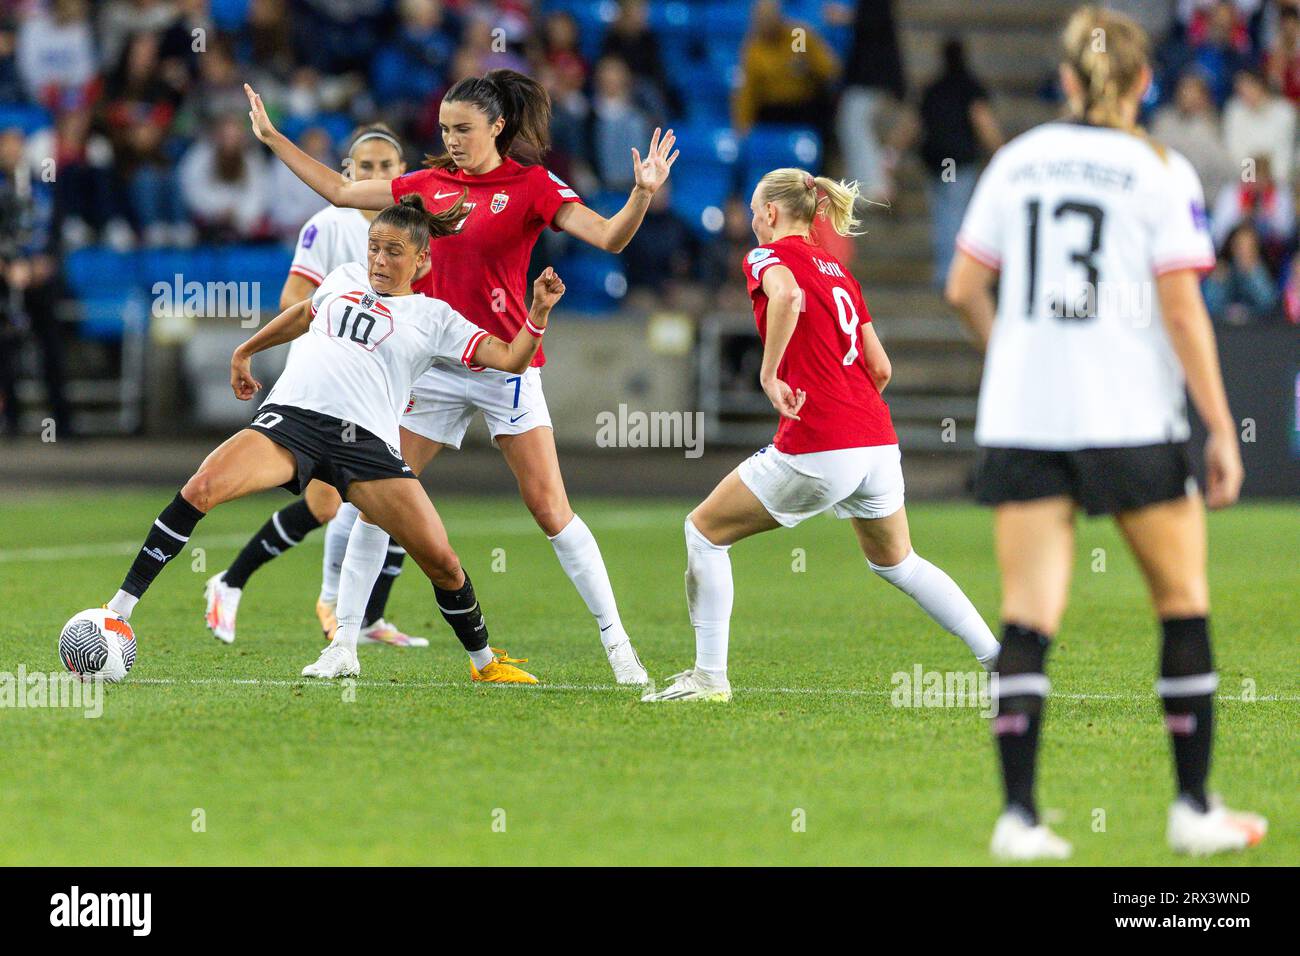 Oslo, Norway 22 September 2023 Laura Feiersinger of Austria manoeuvres the ball during the UEFA Womens Nations League Group A2 match between Norway and Austria held at the Ullevaal Stadion in Oslo, Norway credit: Nigel Waldron/Alamy Live News Stock Photo